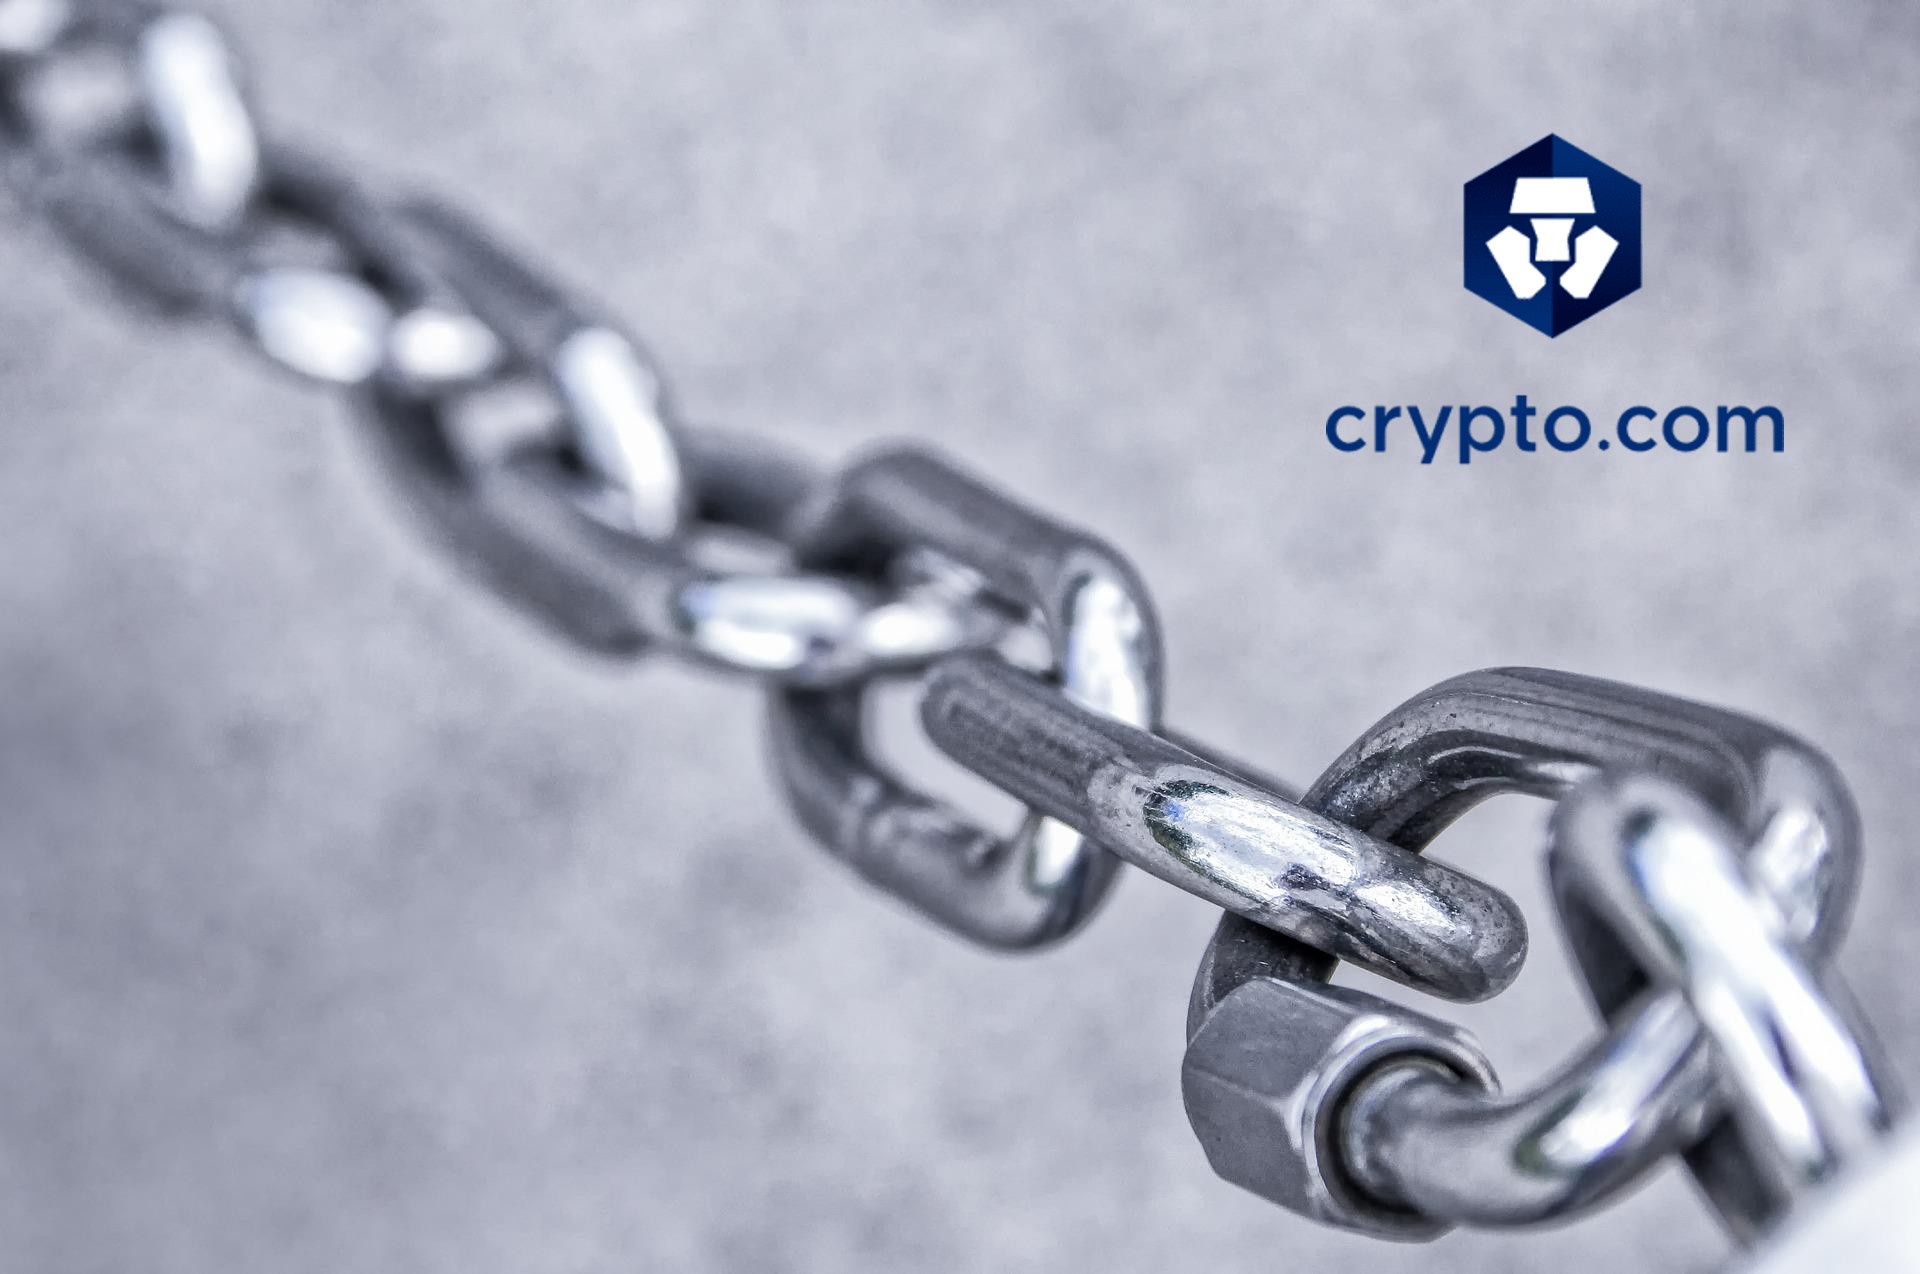 Crypto.com gets data privacy boost with SOC 2 Type II certification